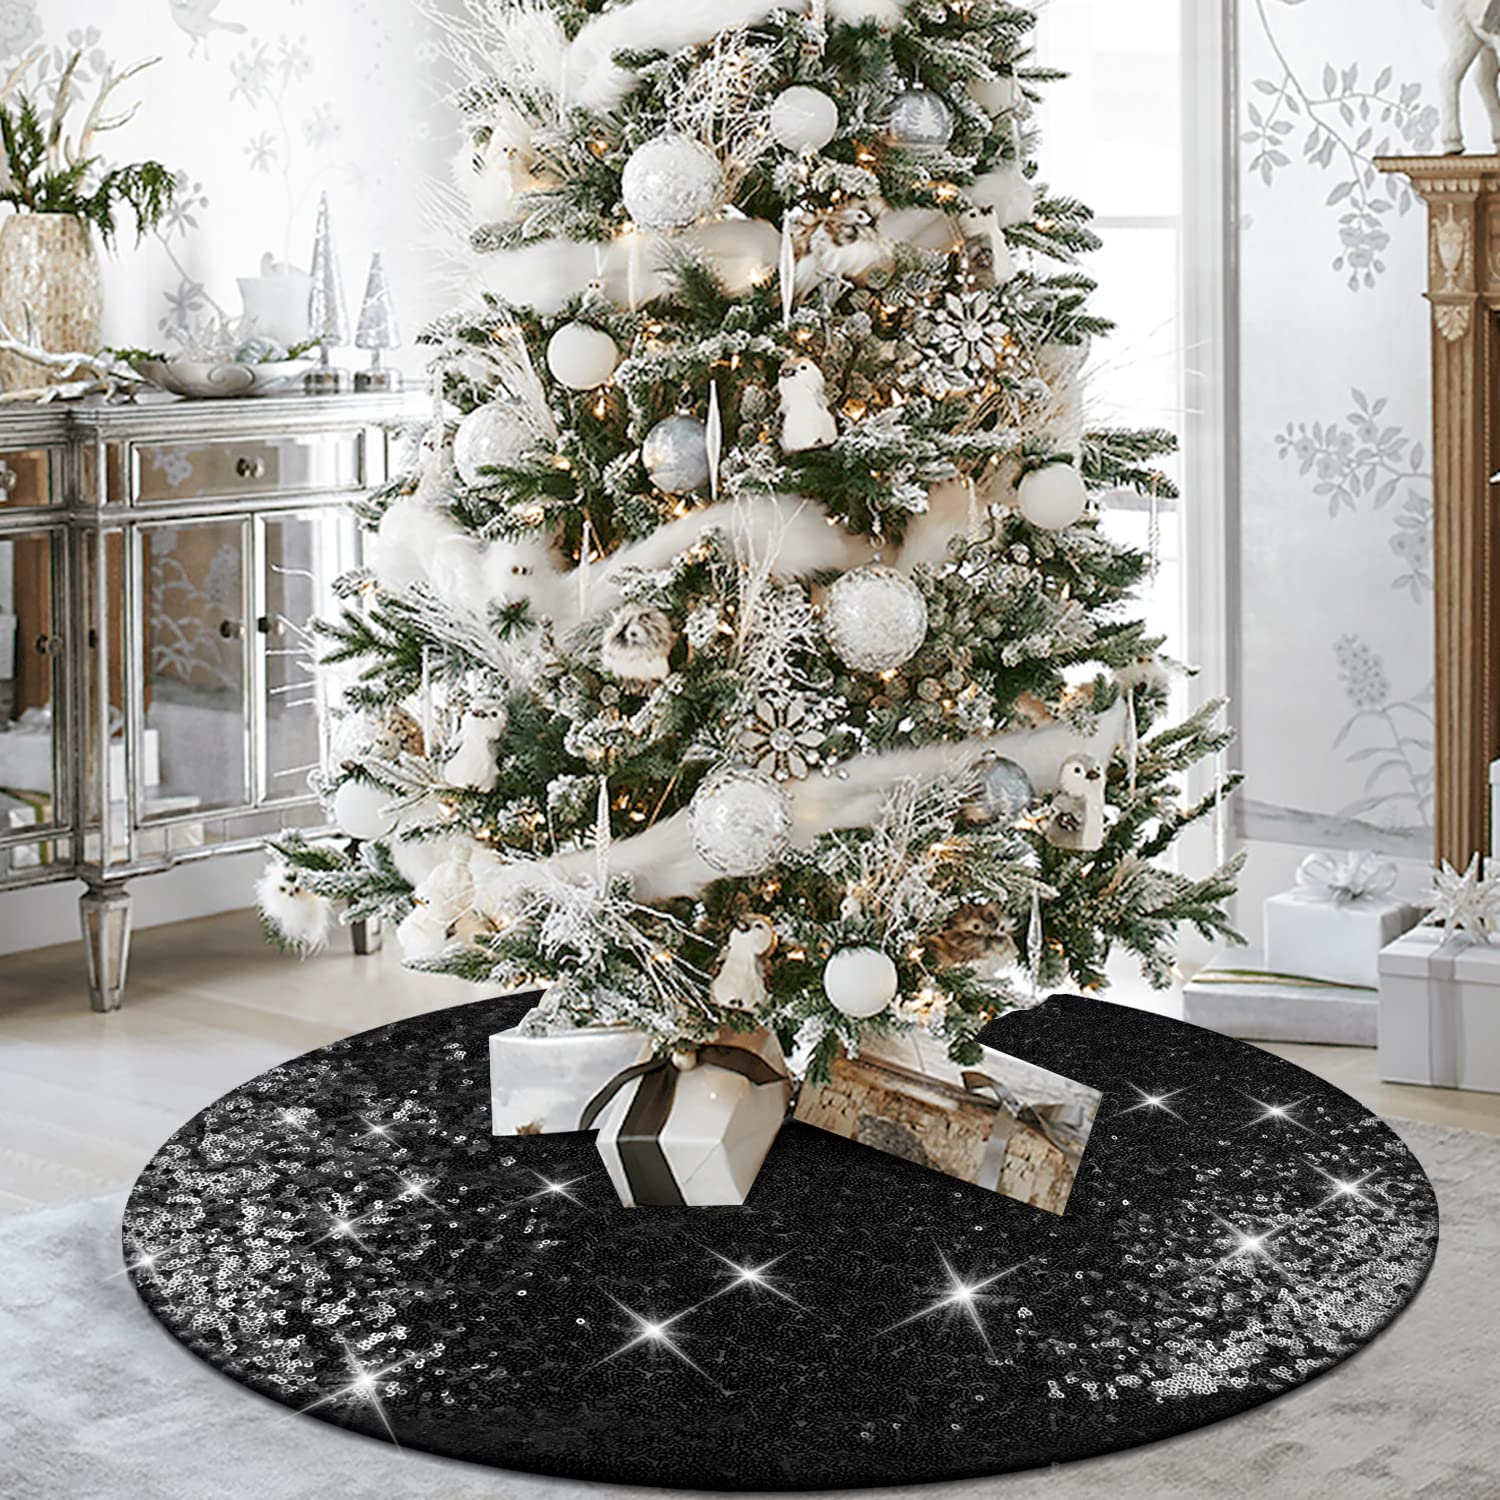 Creating a Beautiful and Unique Black and White Christmas Tree